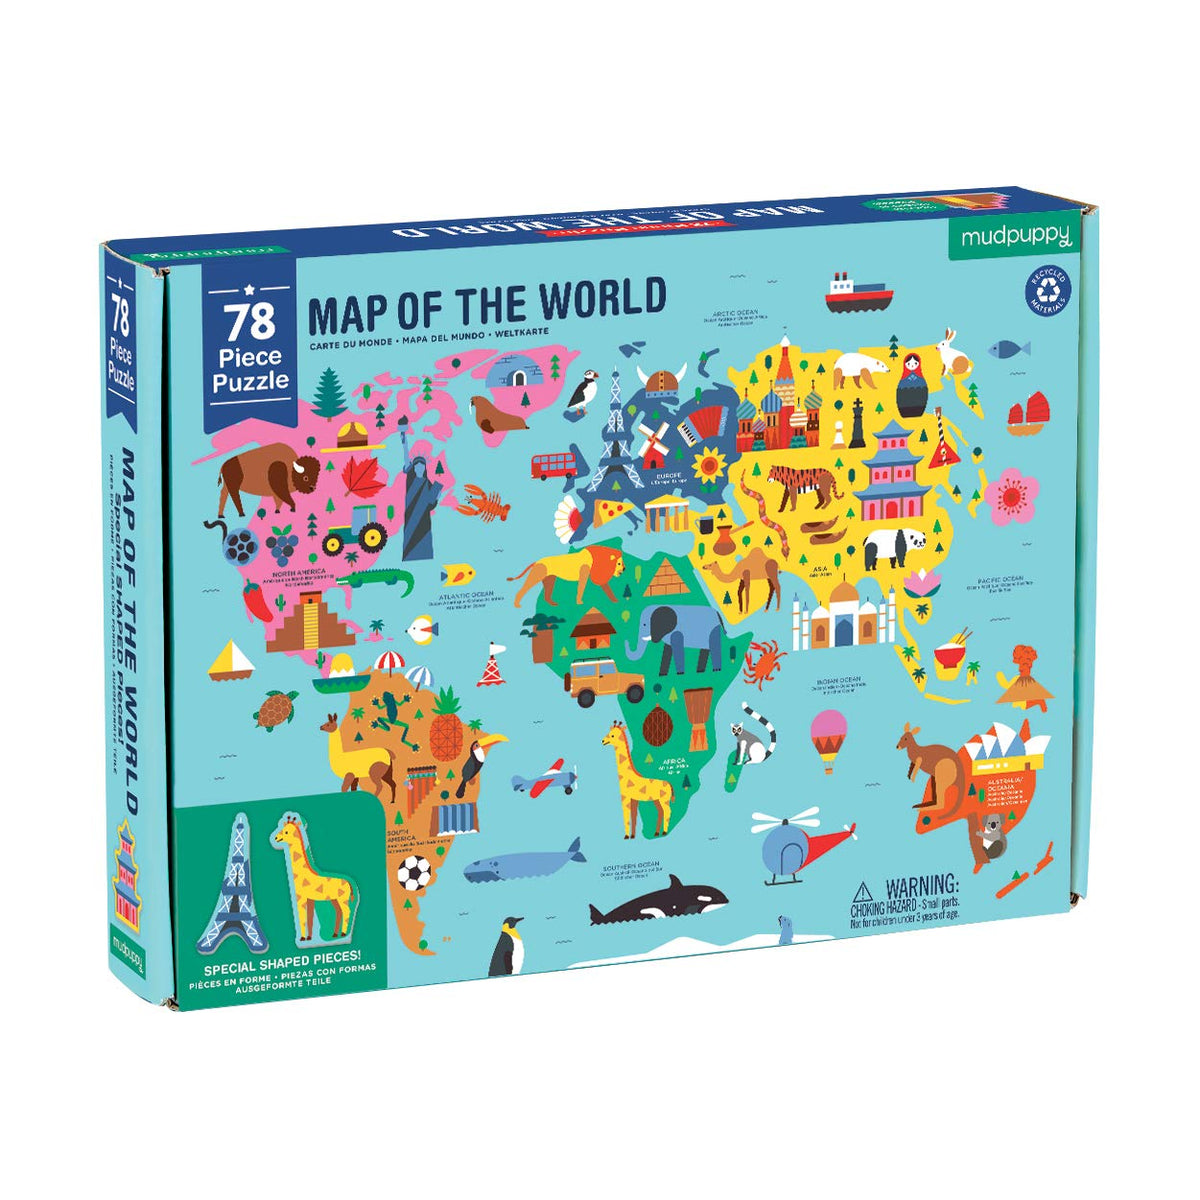 78 Piece Map of the World Puzzle